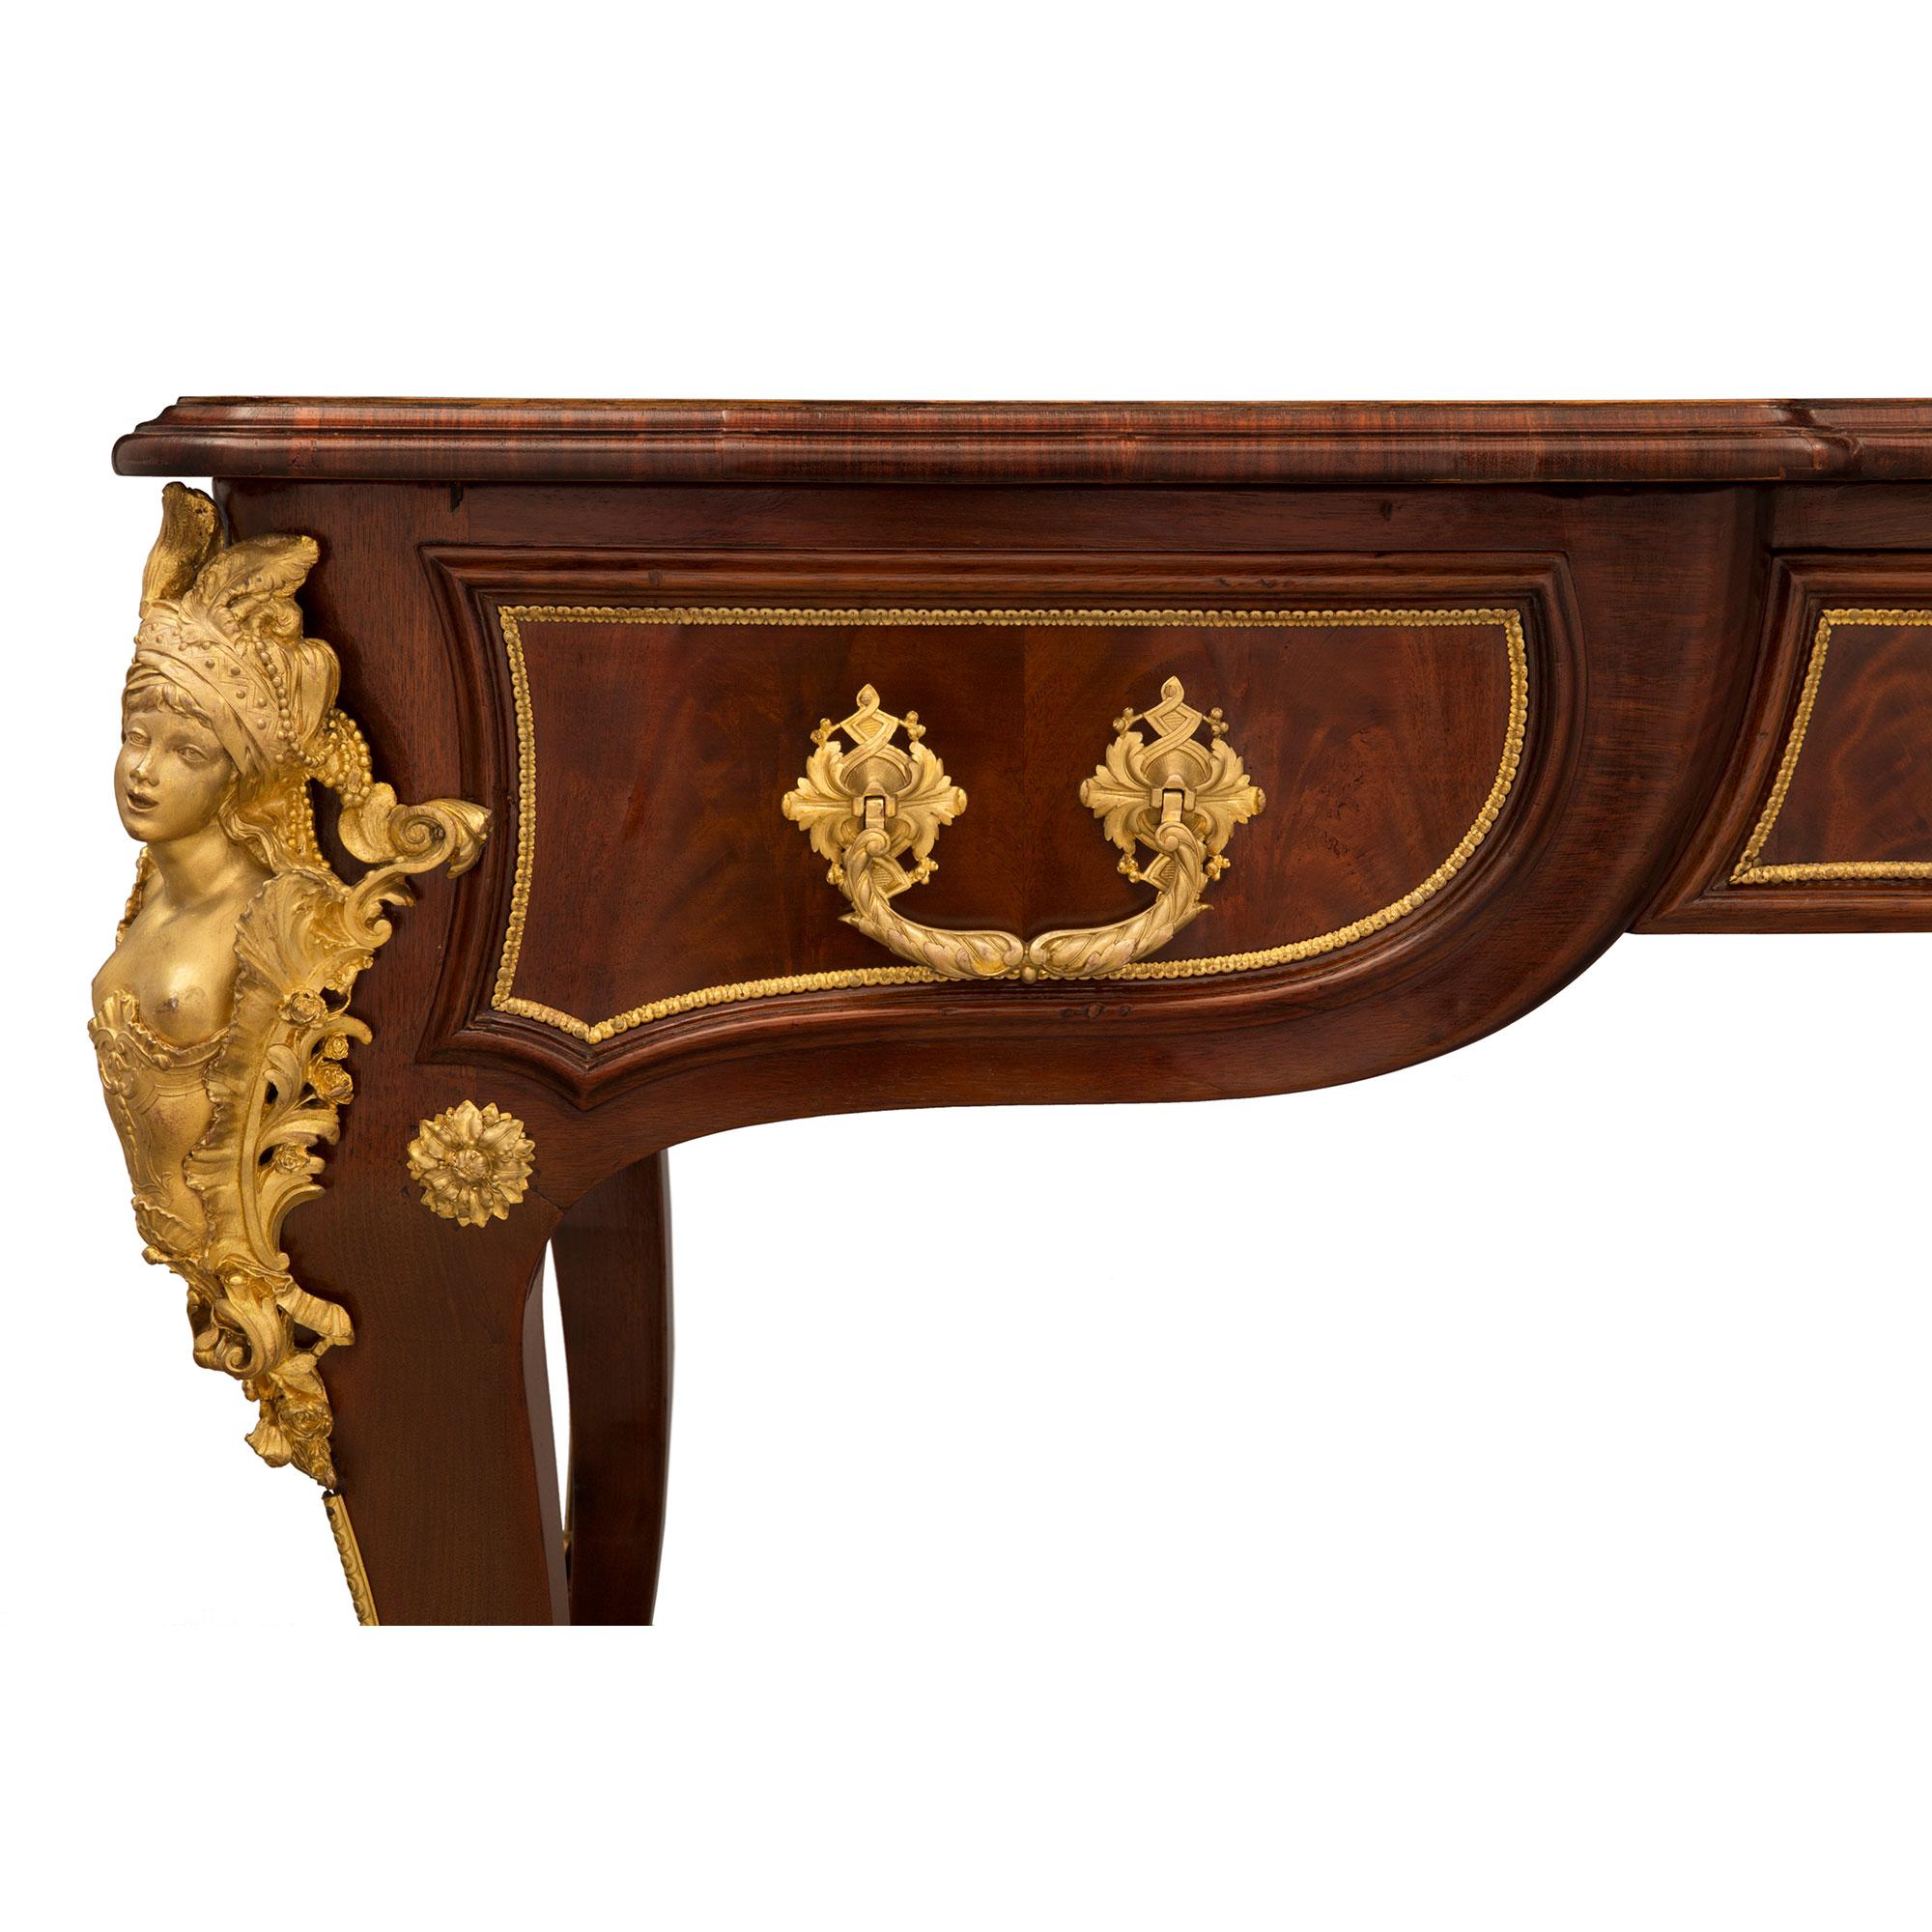 French 19th Century Louis XV Style Flamed Mahogany and Ormolu Bureau Plat Desk For Sale 3